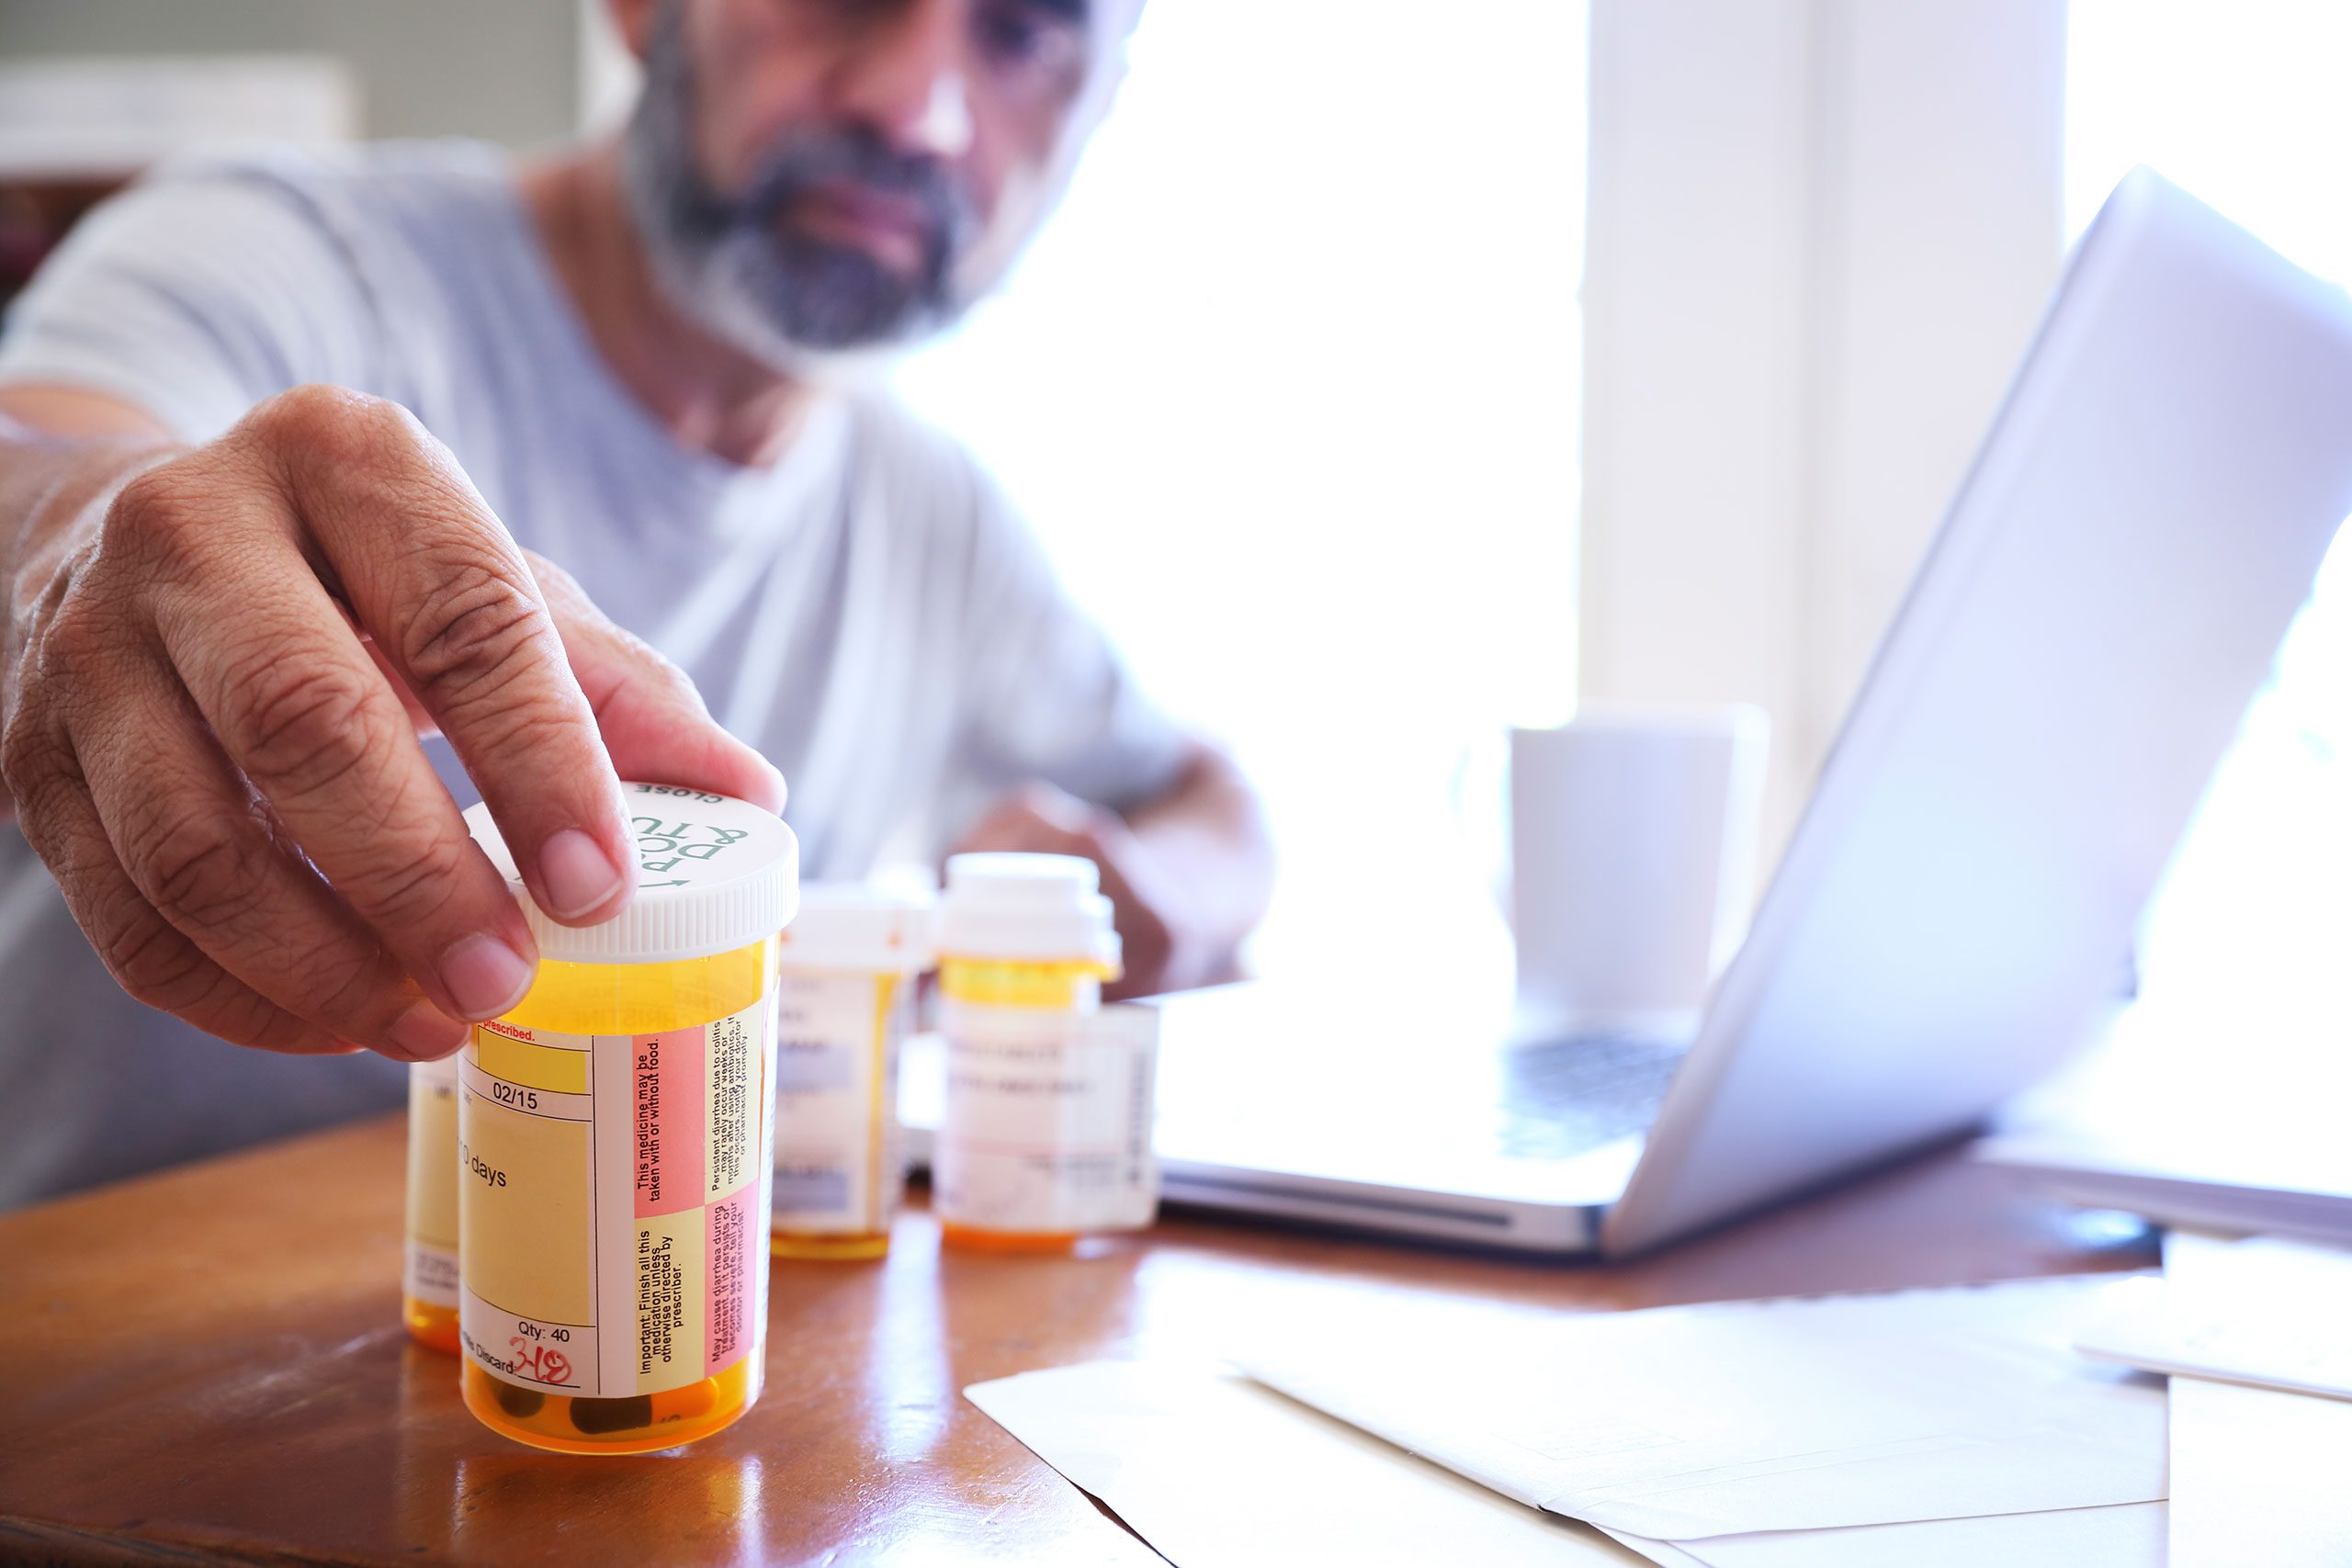 A Hispanic man in his late fifties reaches for one of his prescription medication bottles as he sits at his dining room table. His laptop computer is open in front of him while sunlight filters in through the window behind him bathing the room with a soft glow of light.